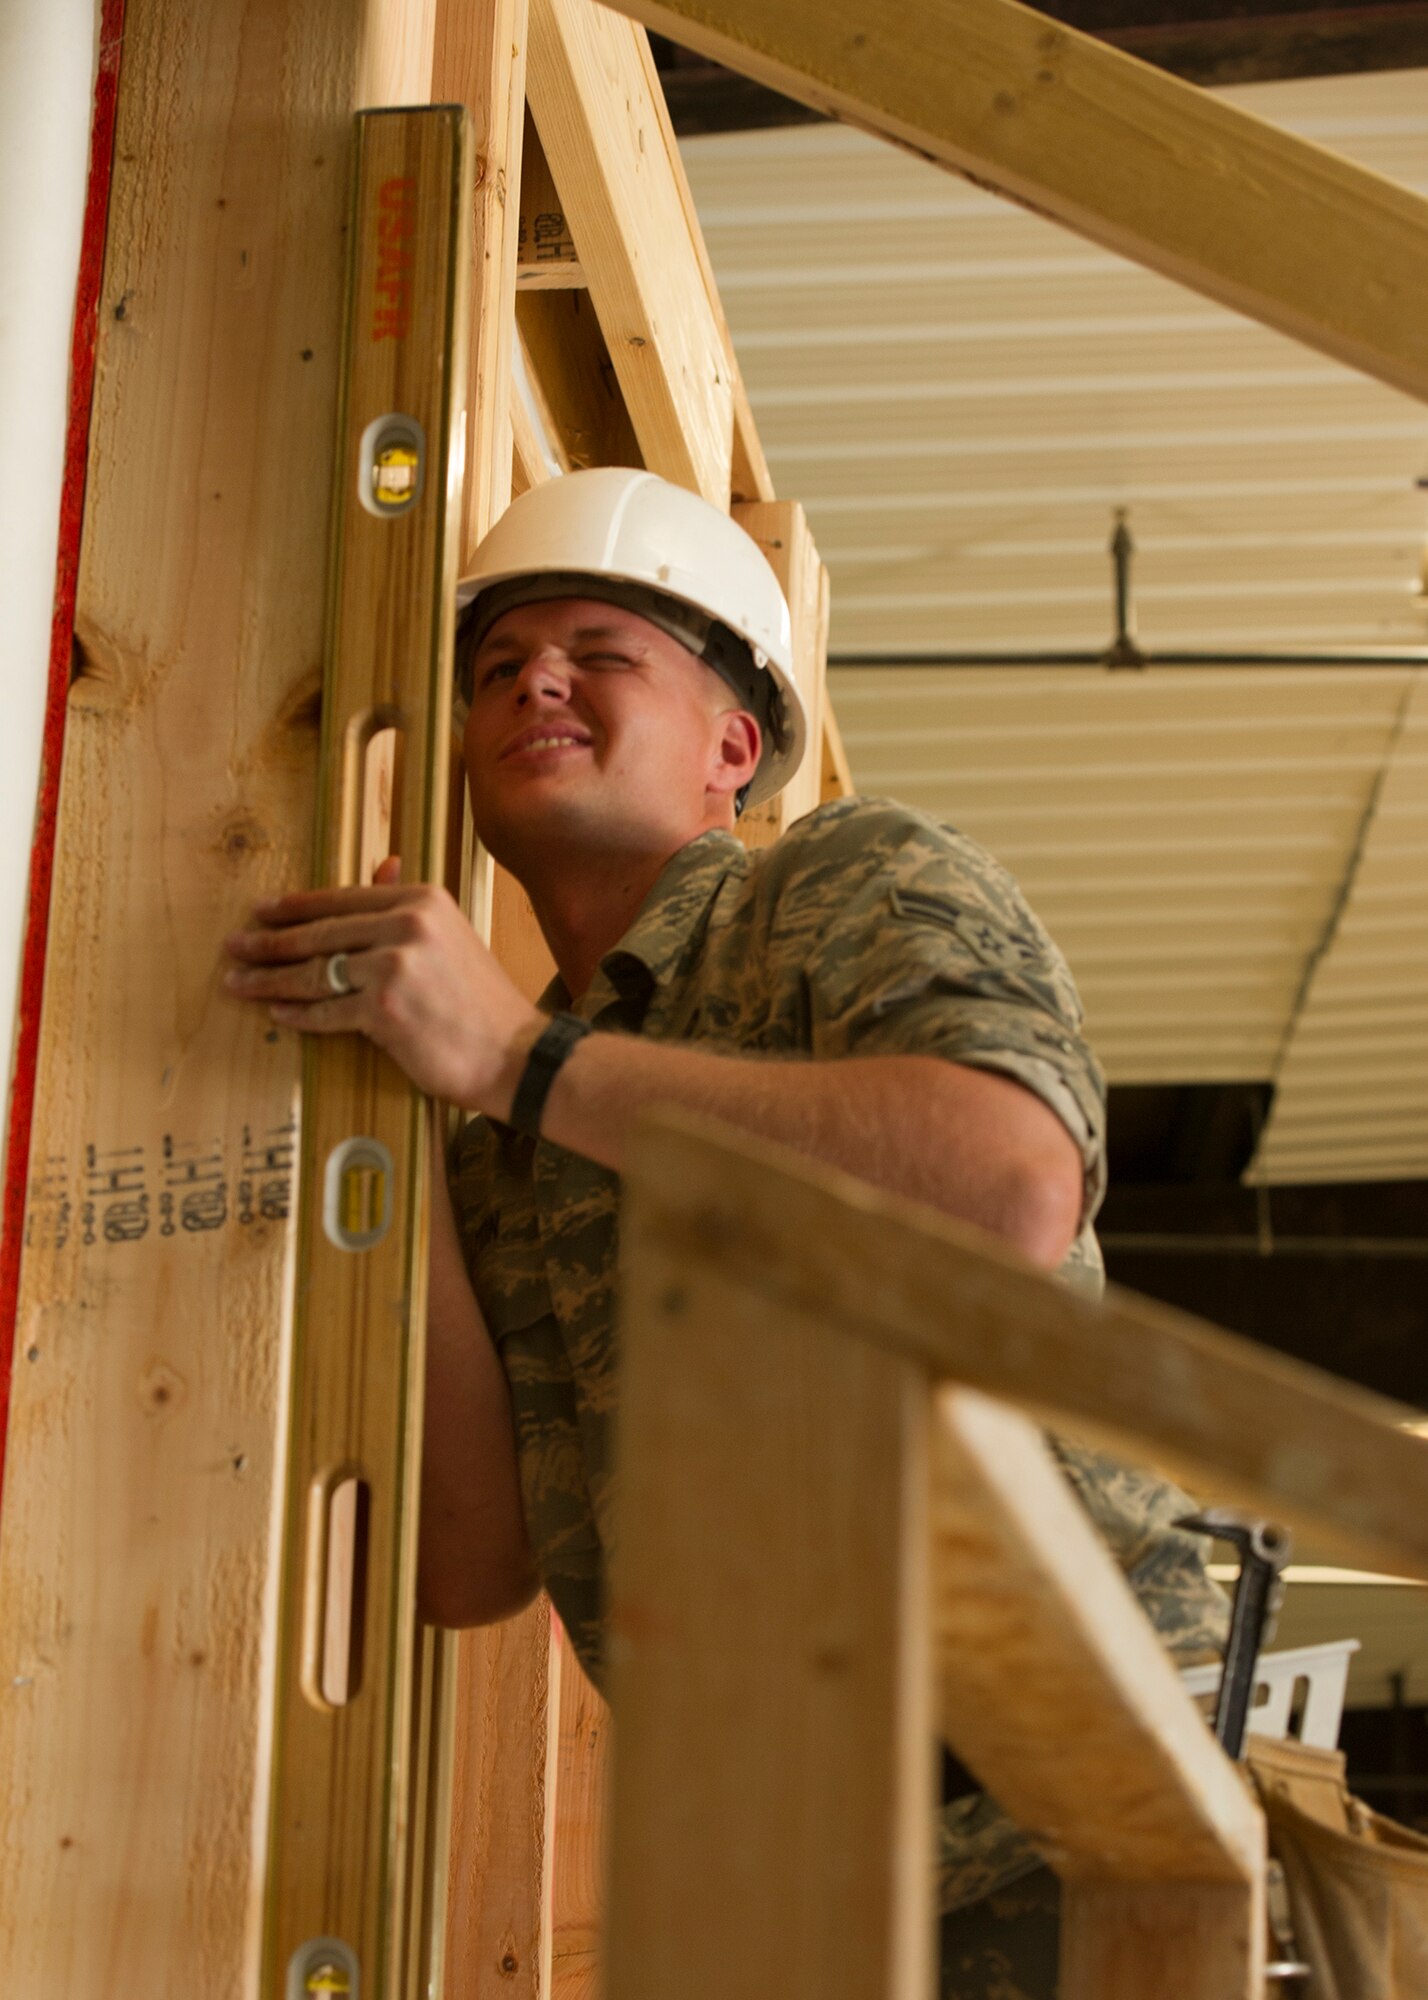 Airman 1st Class Rick Lyons, a utilities technician assigned to the 446th Civil Engineer Squadron, ensures that a wall of a house under construction is straight in Gallup, NM, June 13, 2016. Rainier Wing Citizen Airmen participated in Operation Footprint, a partnership of the Southwest Indian Foundation and the Department of Defense’s Innovative Readiness Training program, which provides an avenue for training military members. Airmen teamed up with Seabee’s from the Naval Mobilization Construction Battalion 22 to construct homes during their two weeks of annual training. (U.S. Air Force Reserve photo by Tech. Sgt. Bryan Hull)